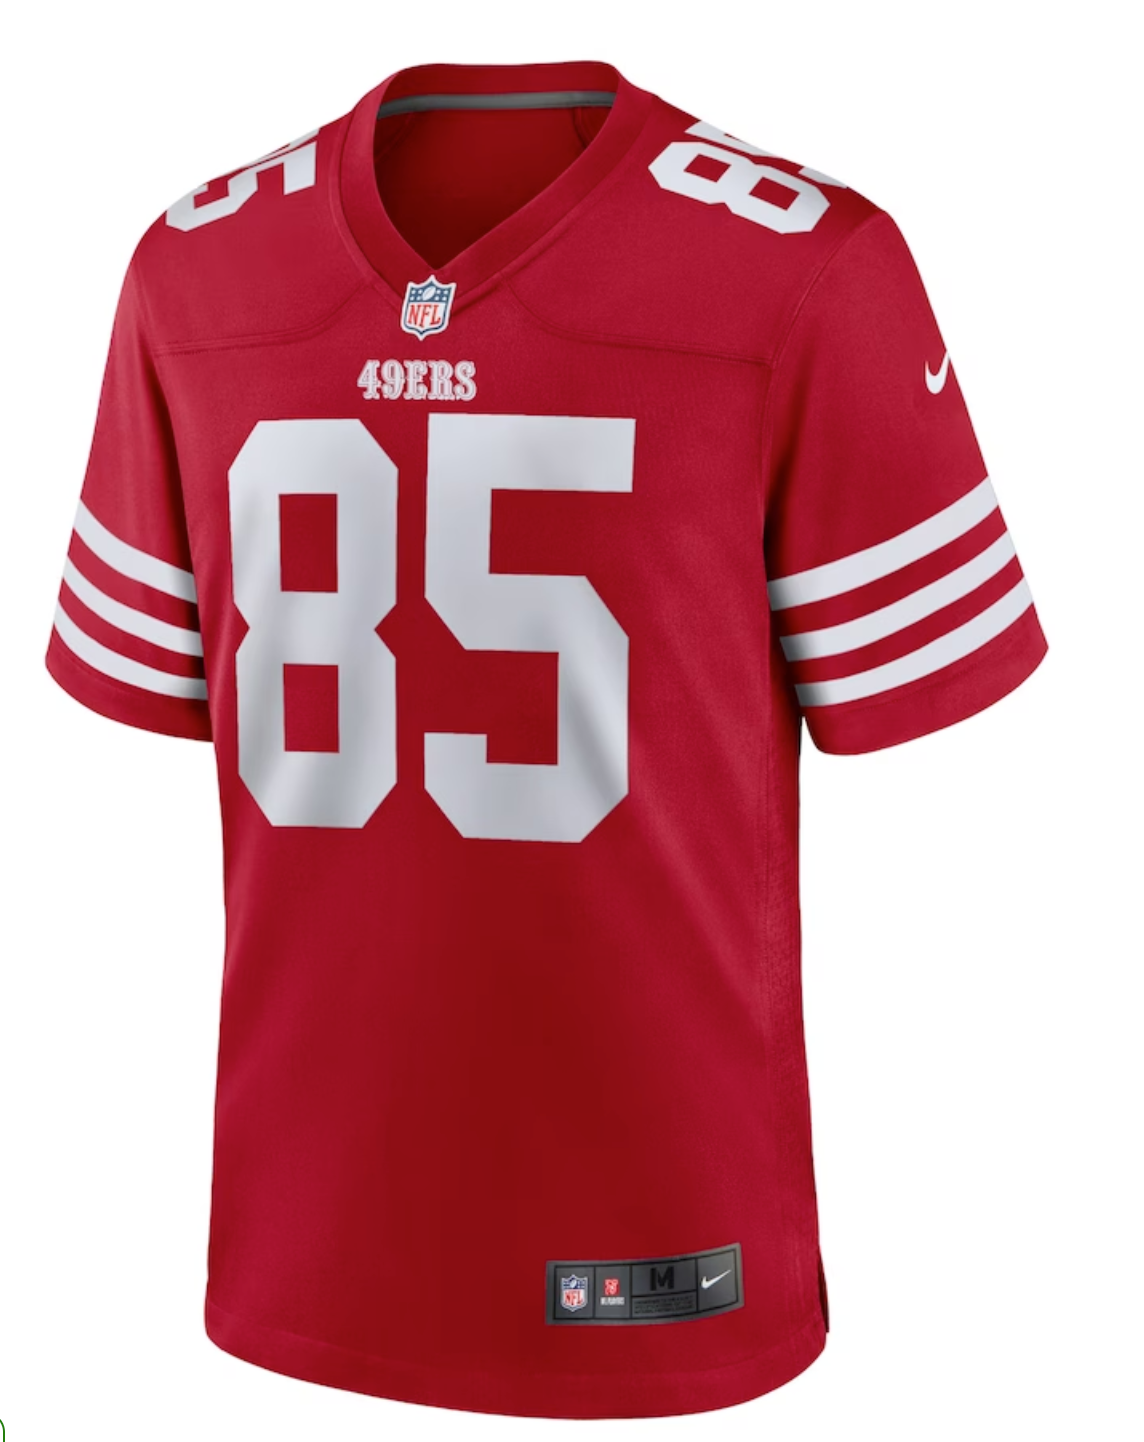 49ers Kittle Nike Adult Player Jersey